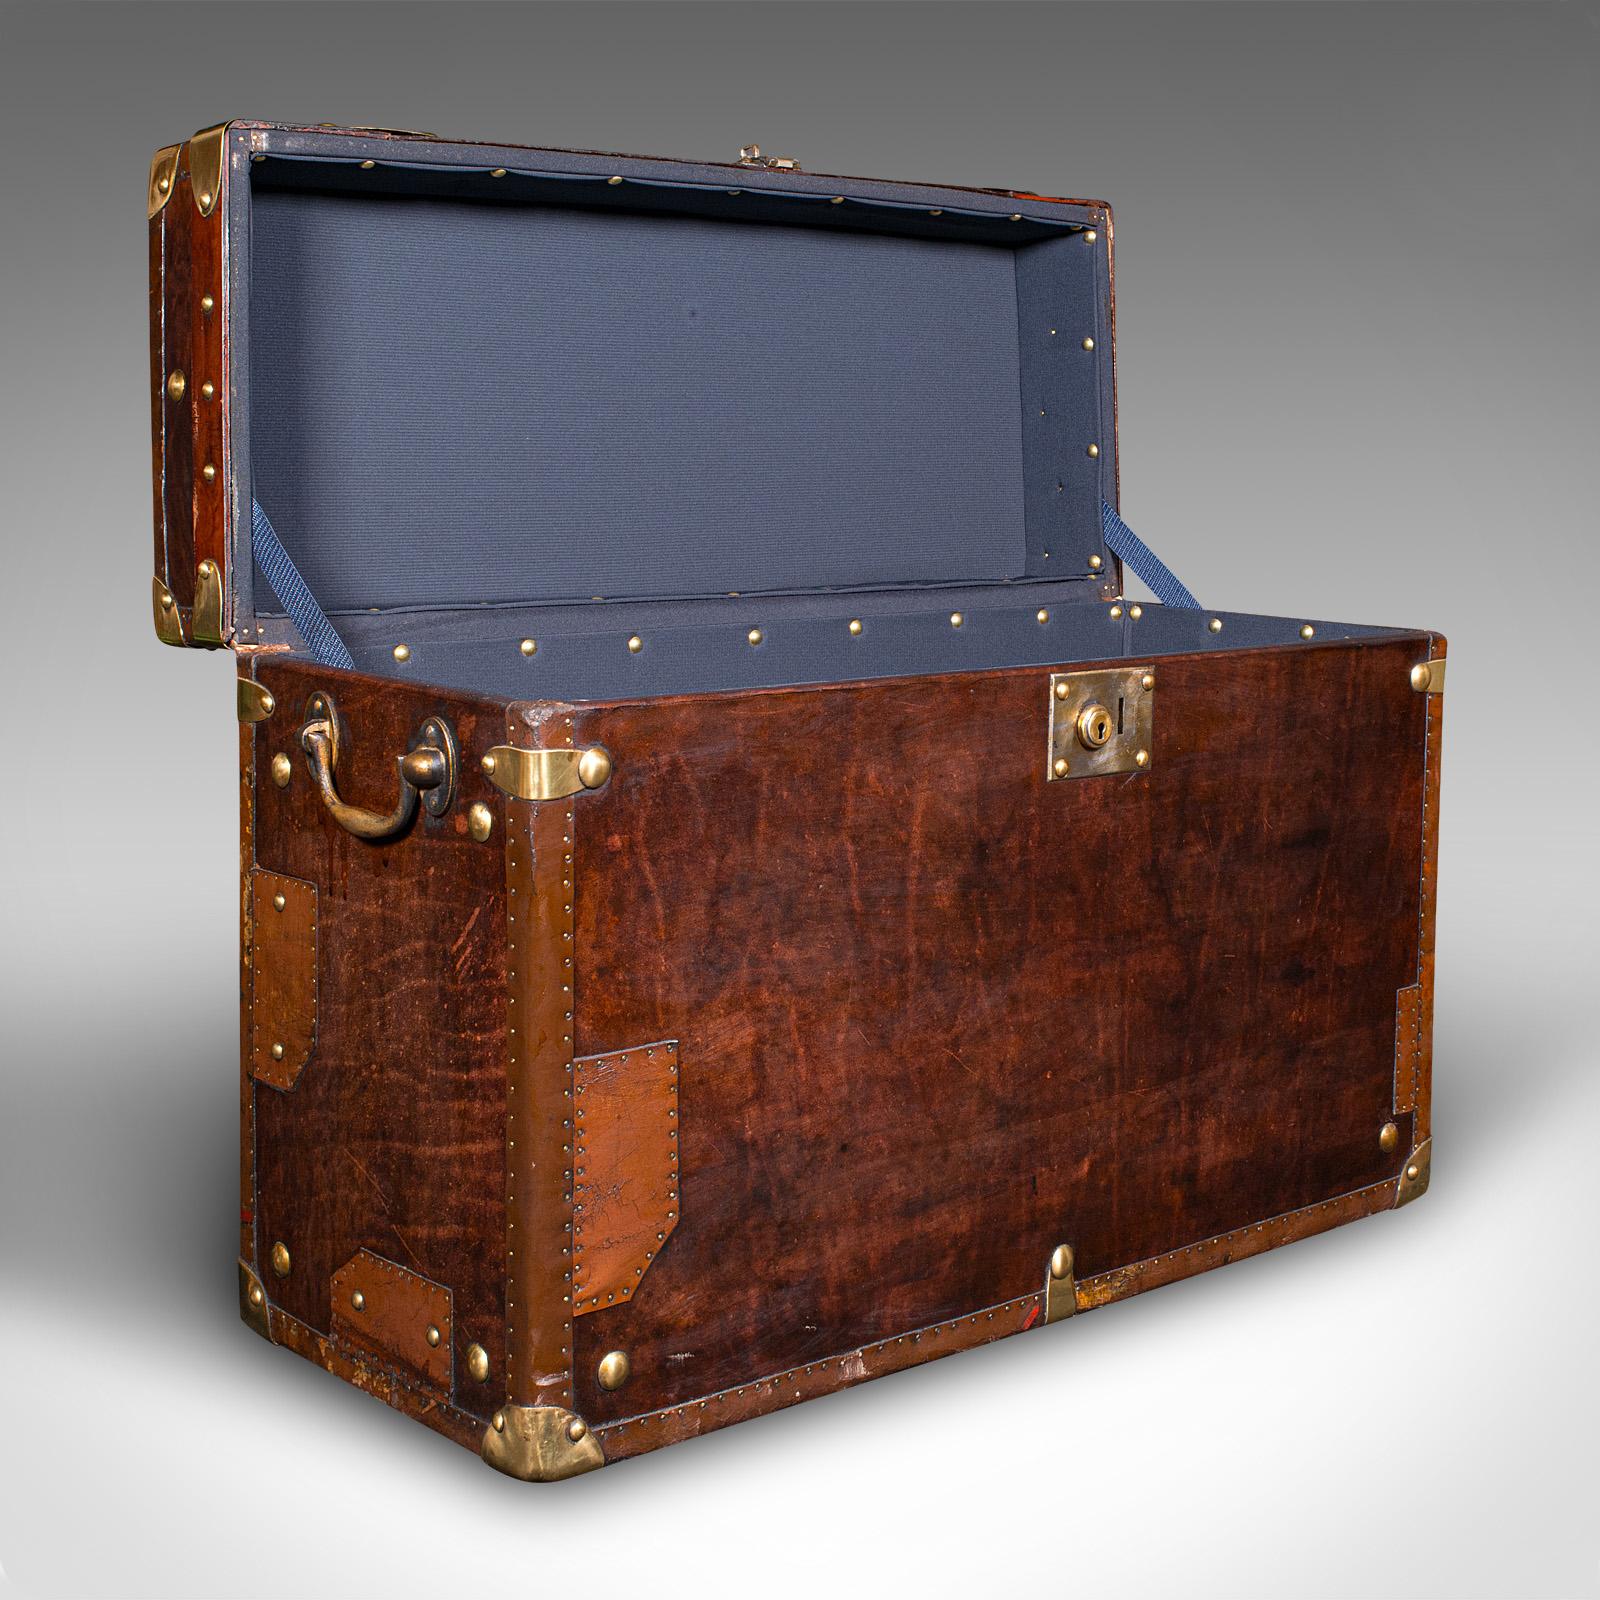 This is a large vintage campaign luggage case. An English, leather and brass bedside nightstand, dating to the late 20th century, circa 1990.
 
Wonderful craftsmanship, adding a touch of distinction to your luggage
Displaying a desirable aged patina